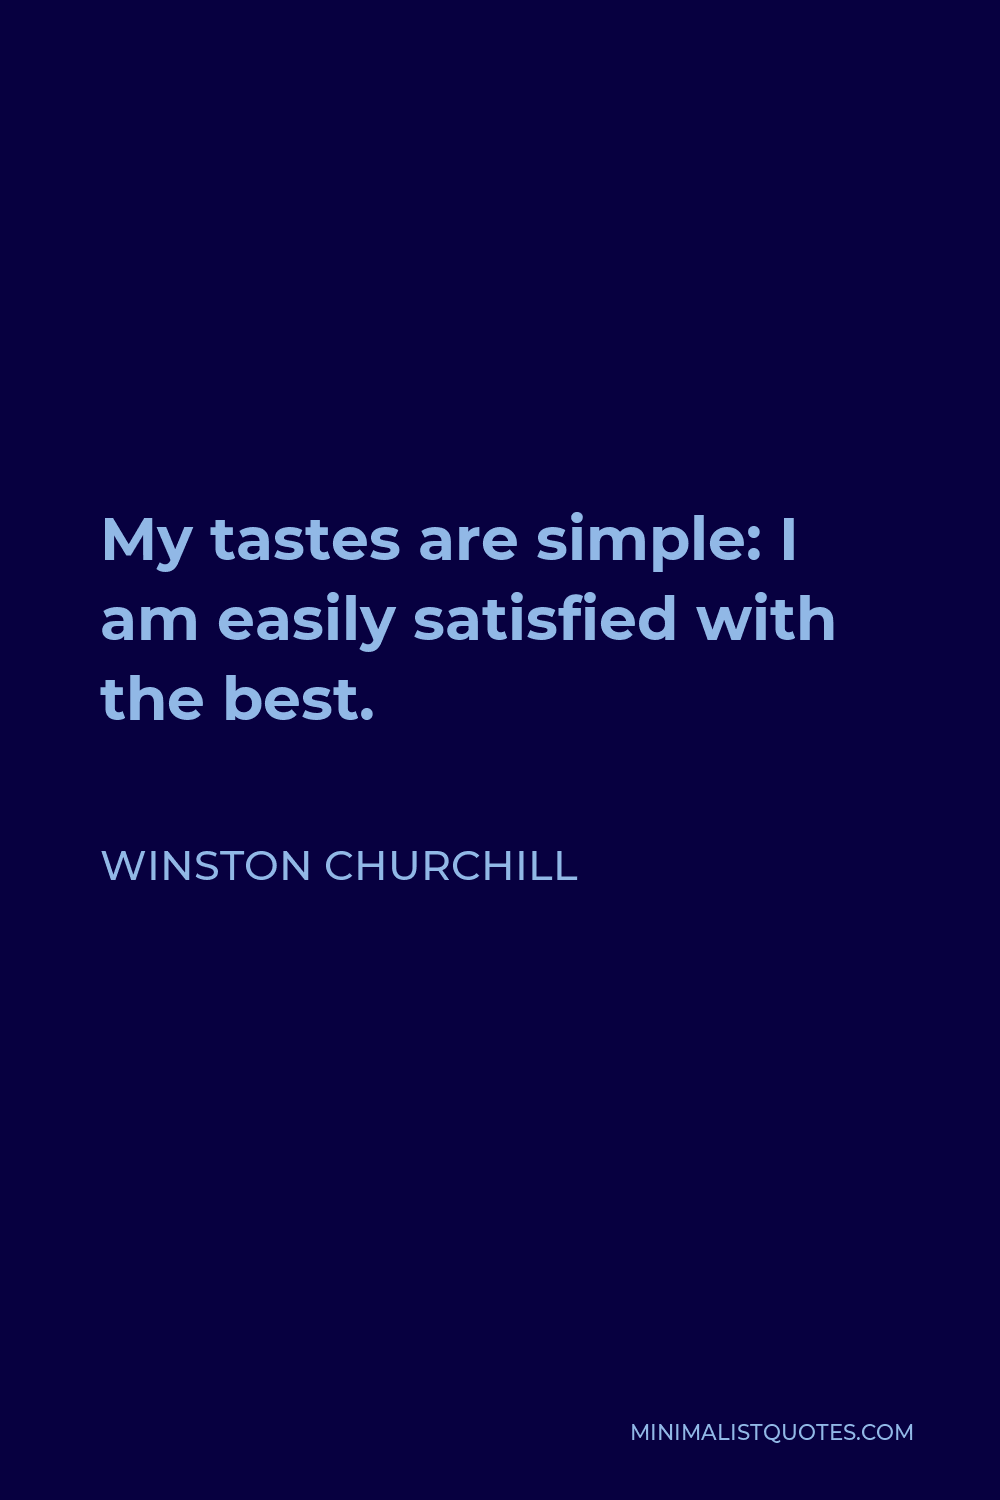 Winston Churchill Quote - My tastes are simple: I am easily satisfied with the best.